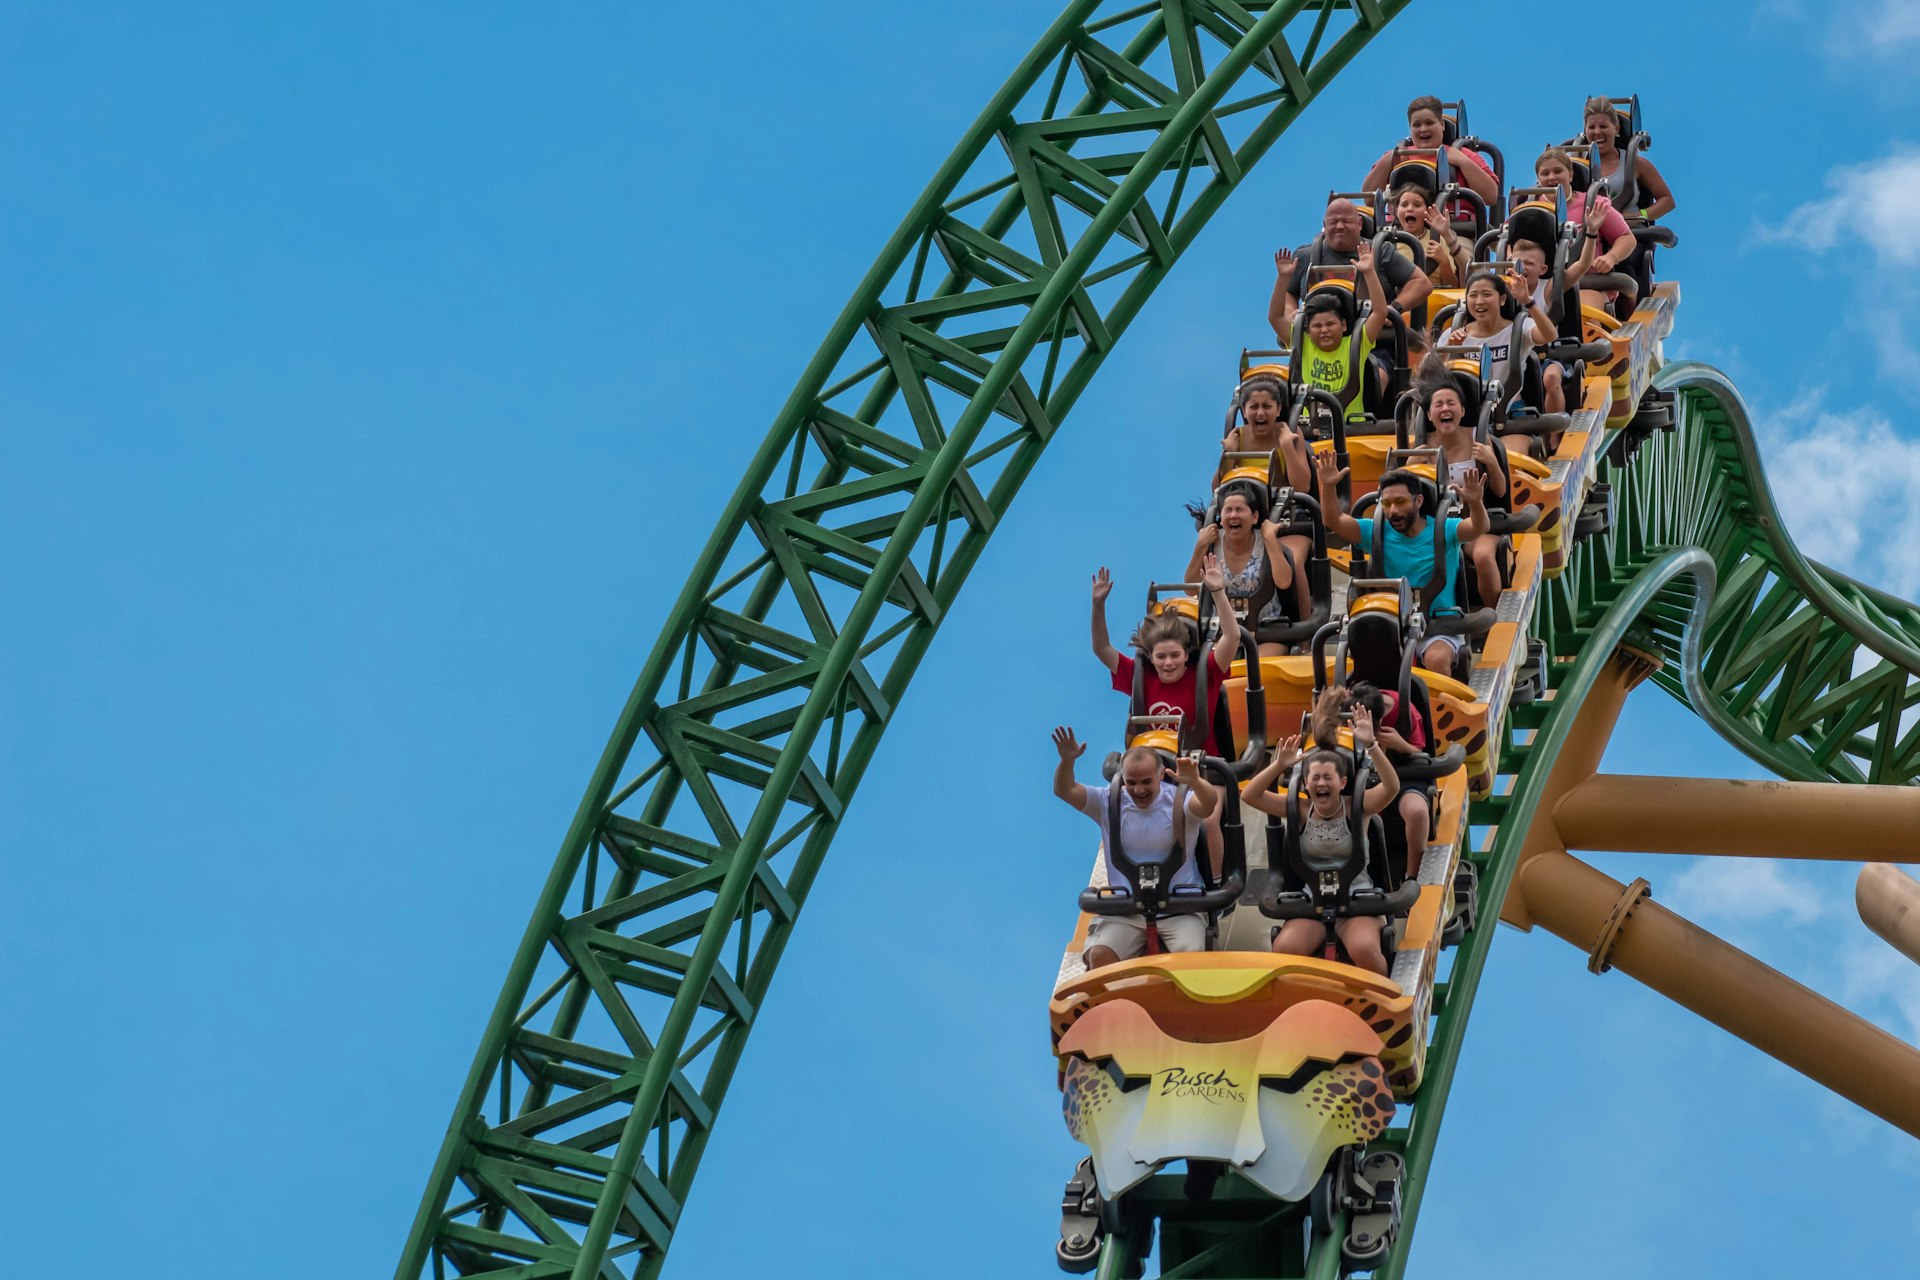 People on a rollercoaster with their arms up, screaming and smiling, against a light blue cloudy sky